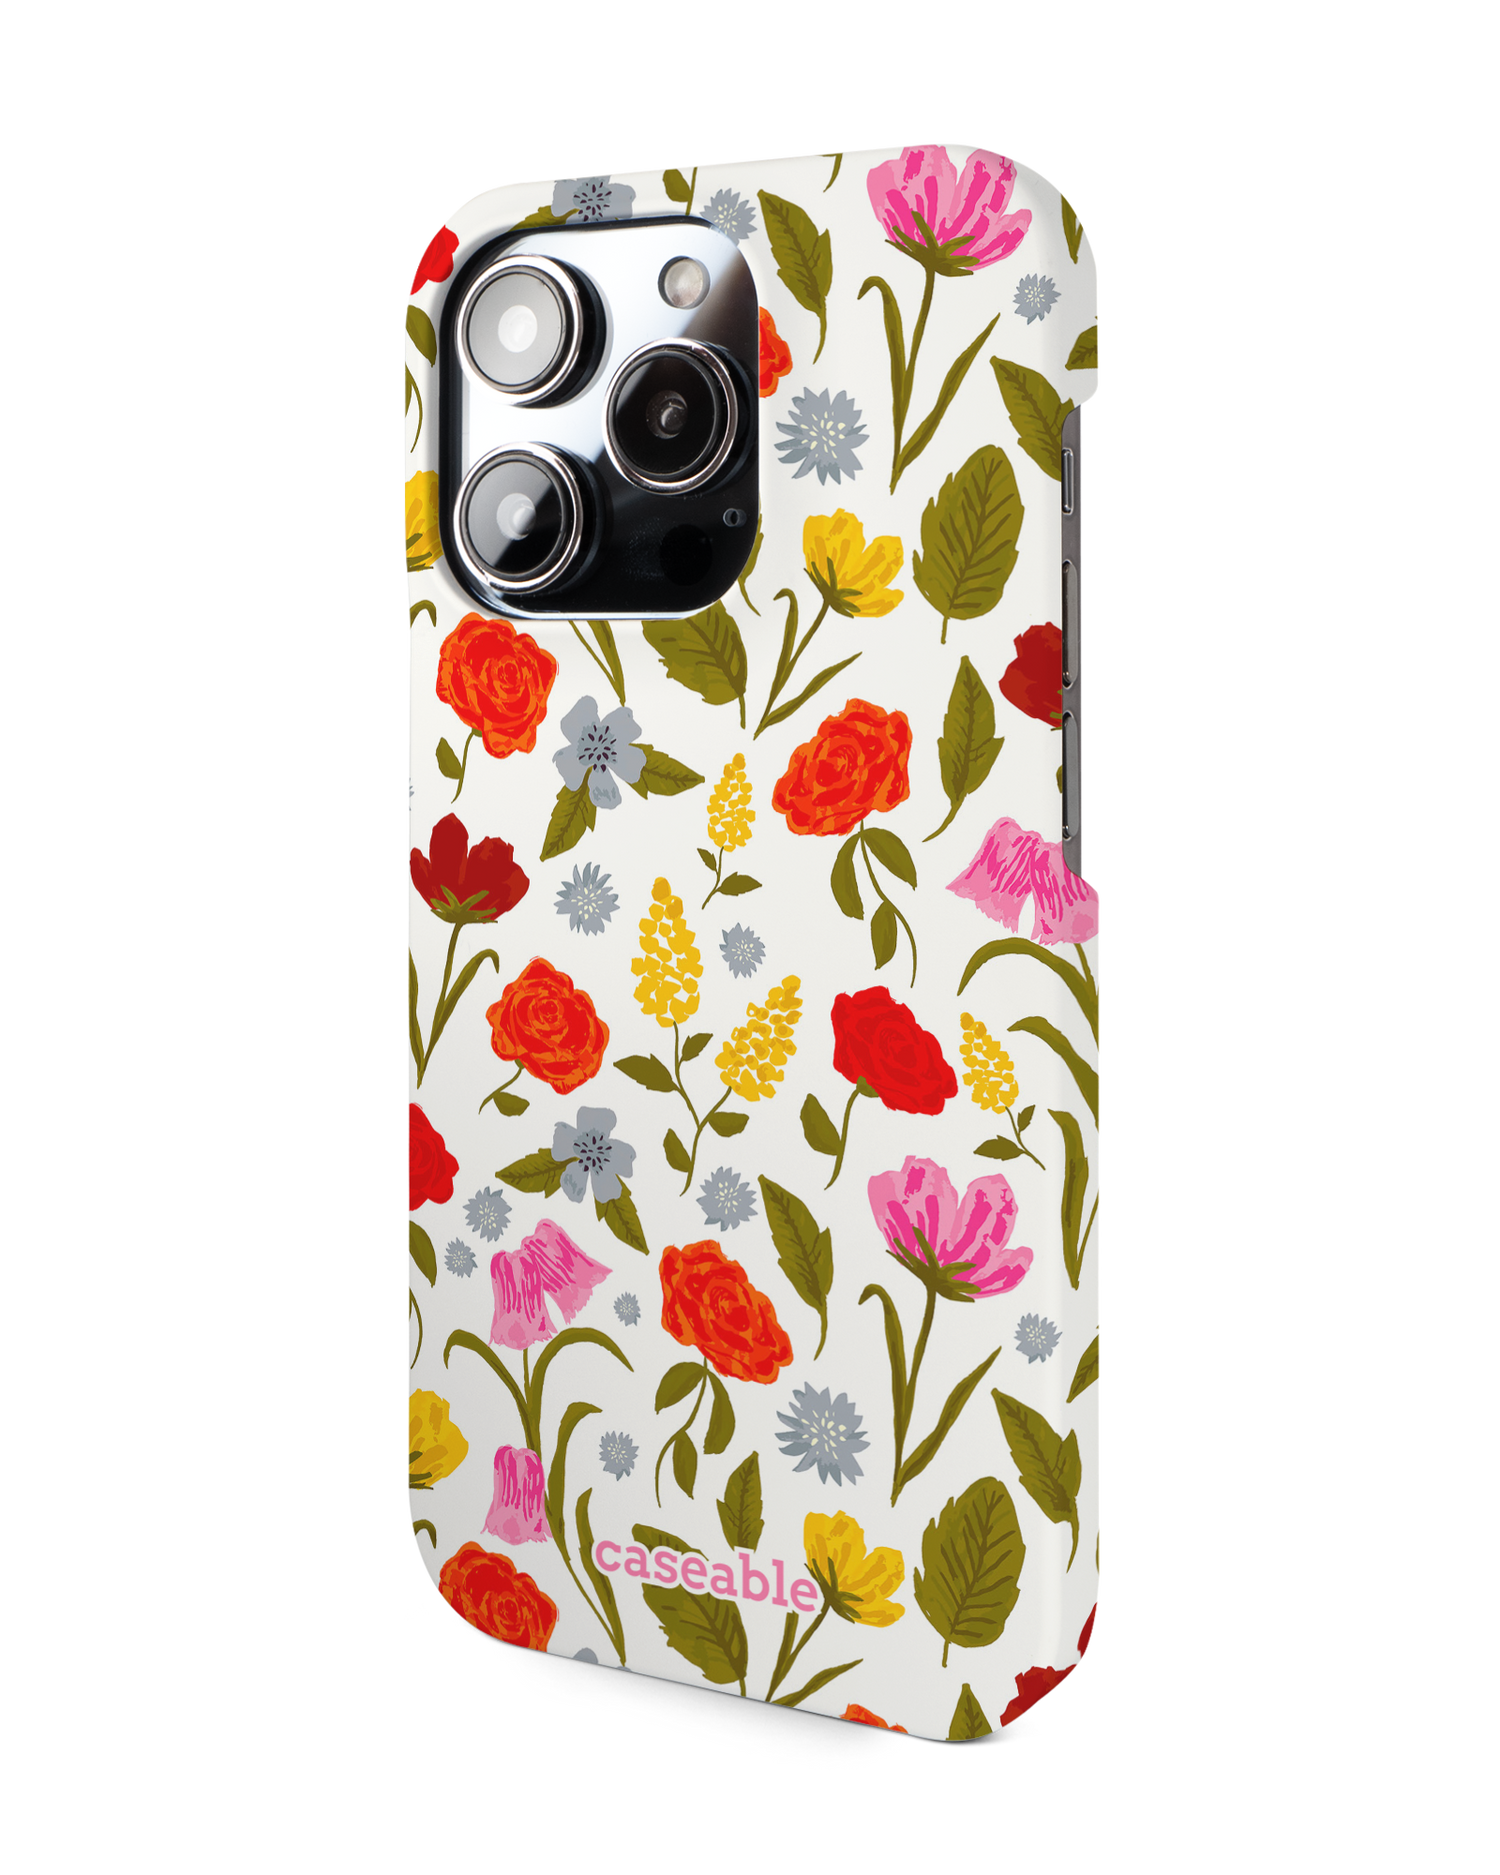 Botanical Beauties Hard Shell Phone Case for Apple iPhone 14 Pro: View from the right side